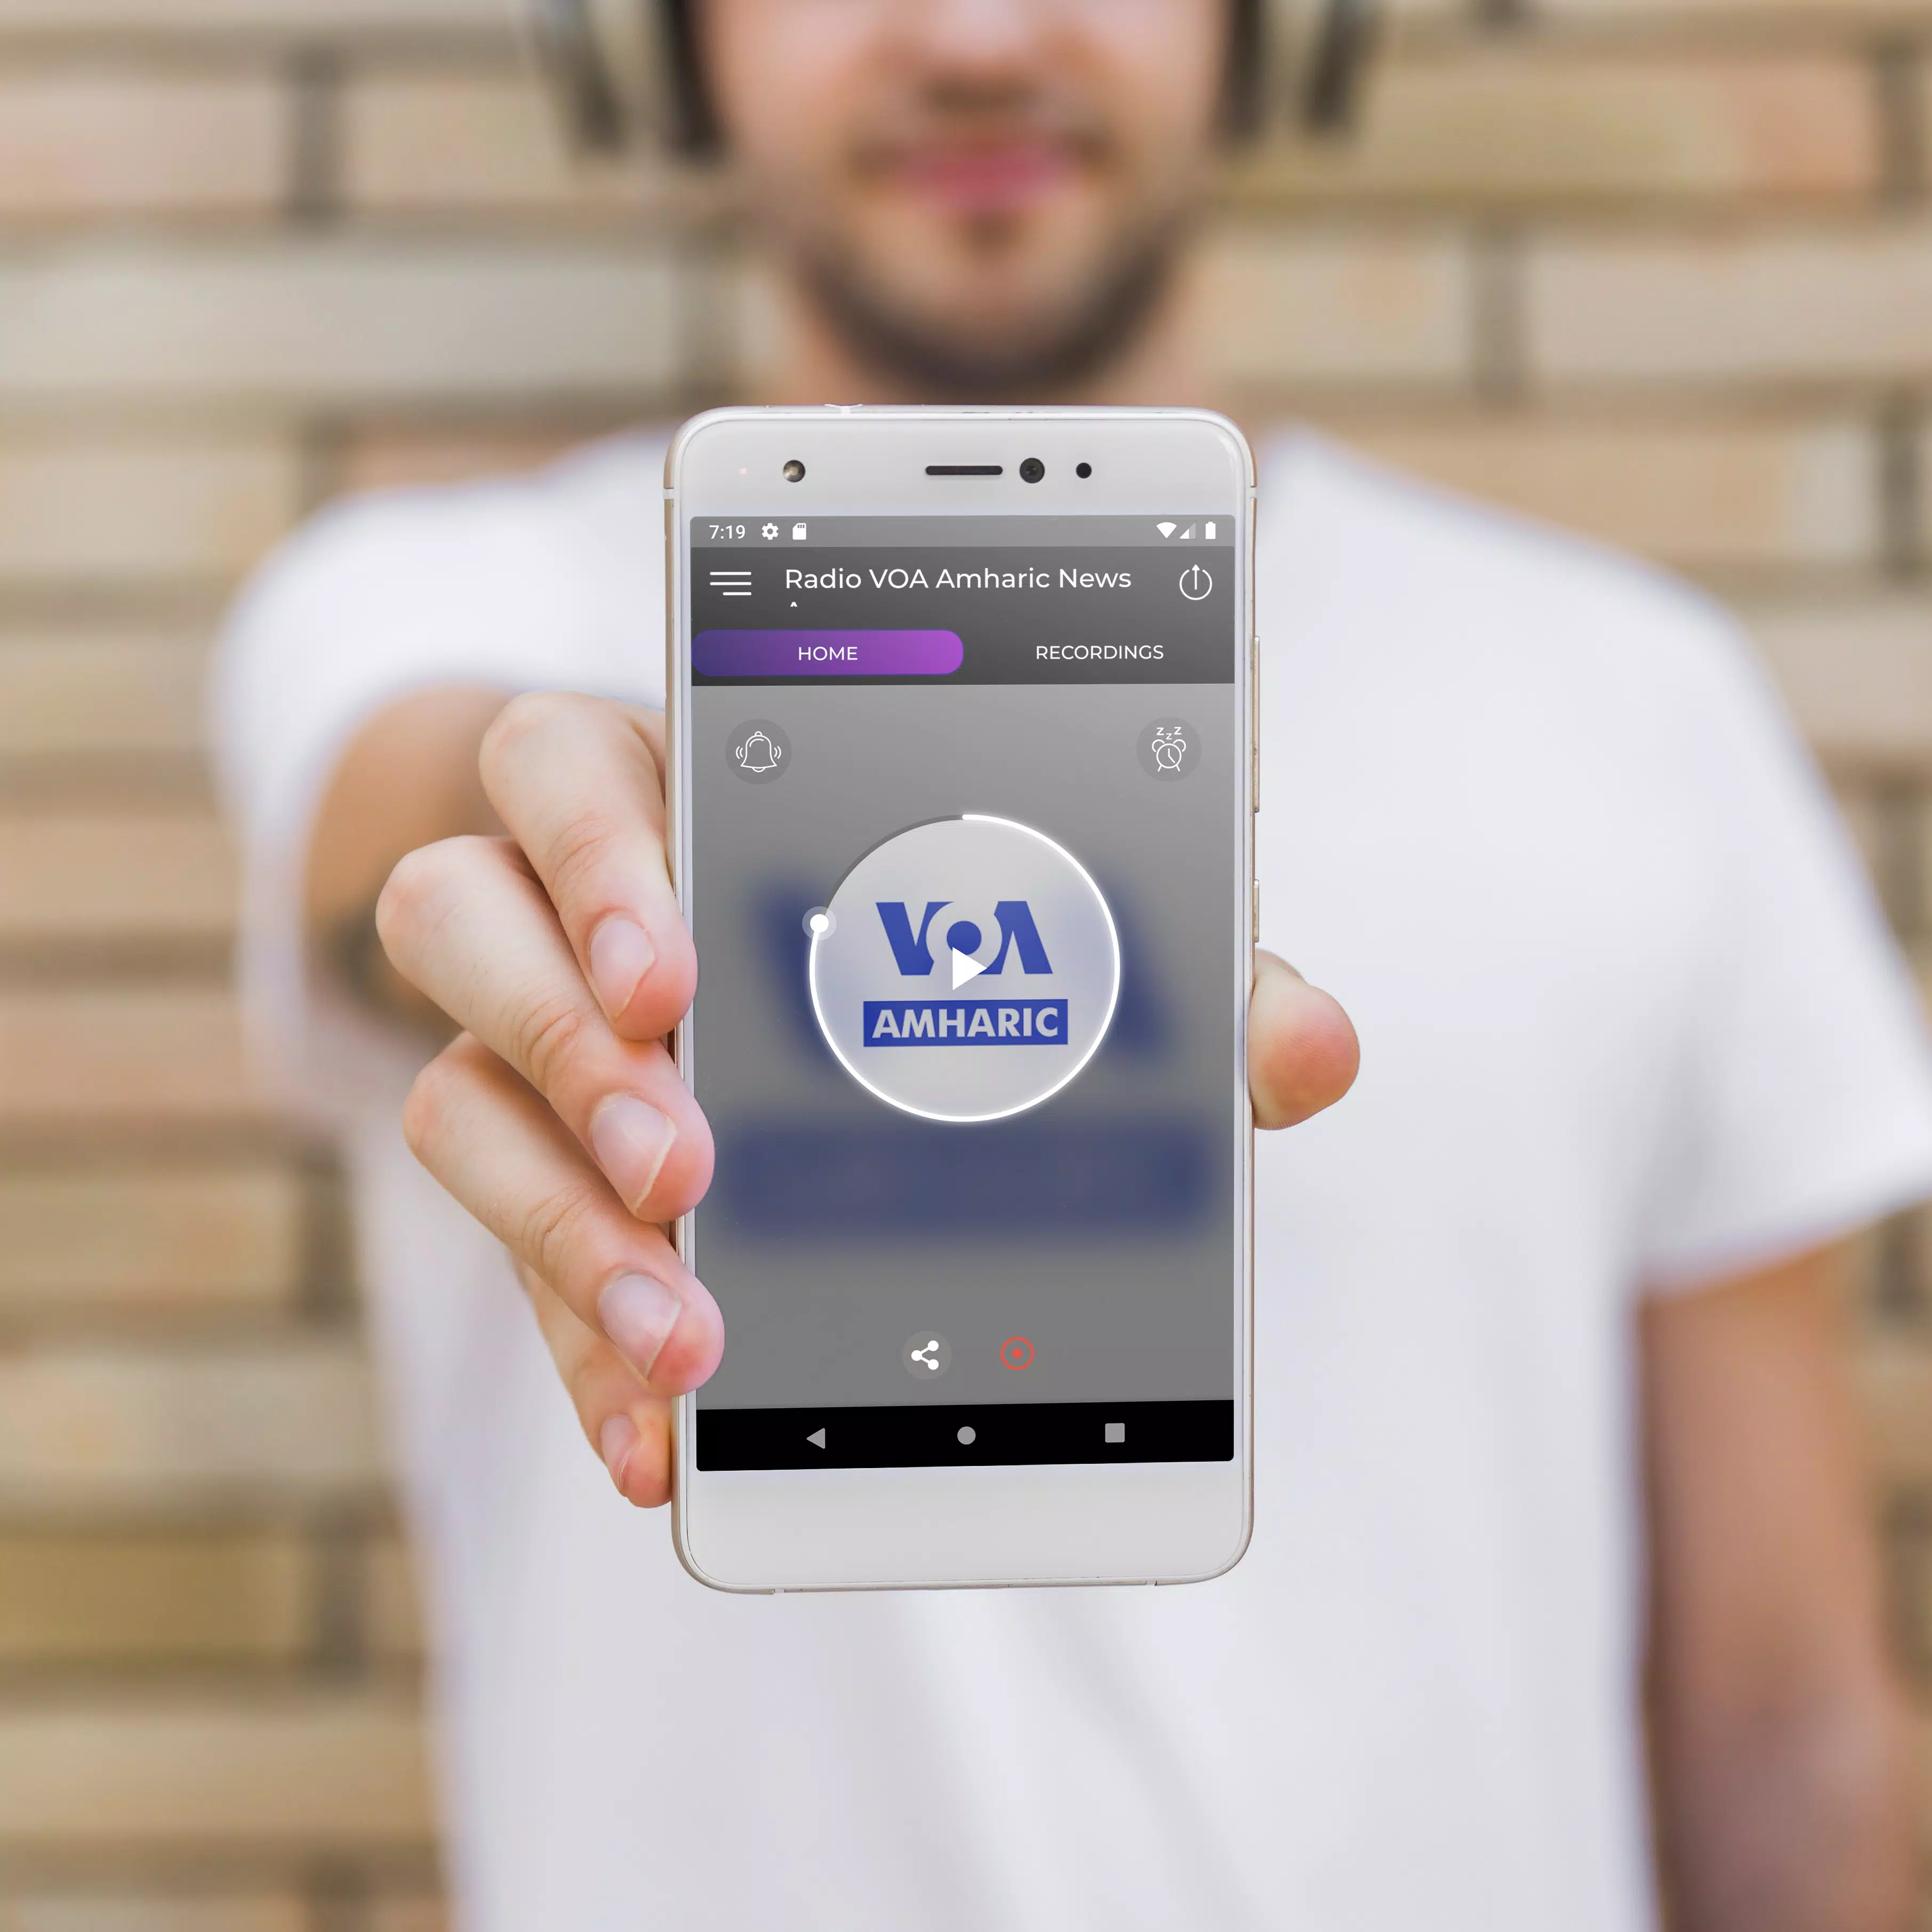 Radio VOA Amharic News for Android - APK Download